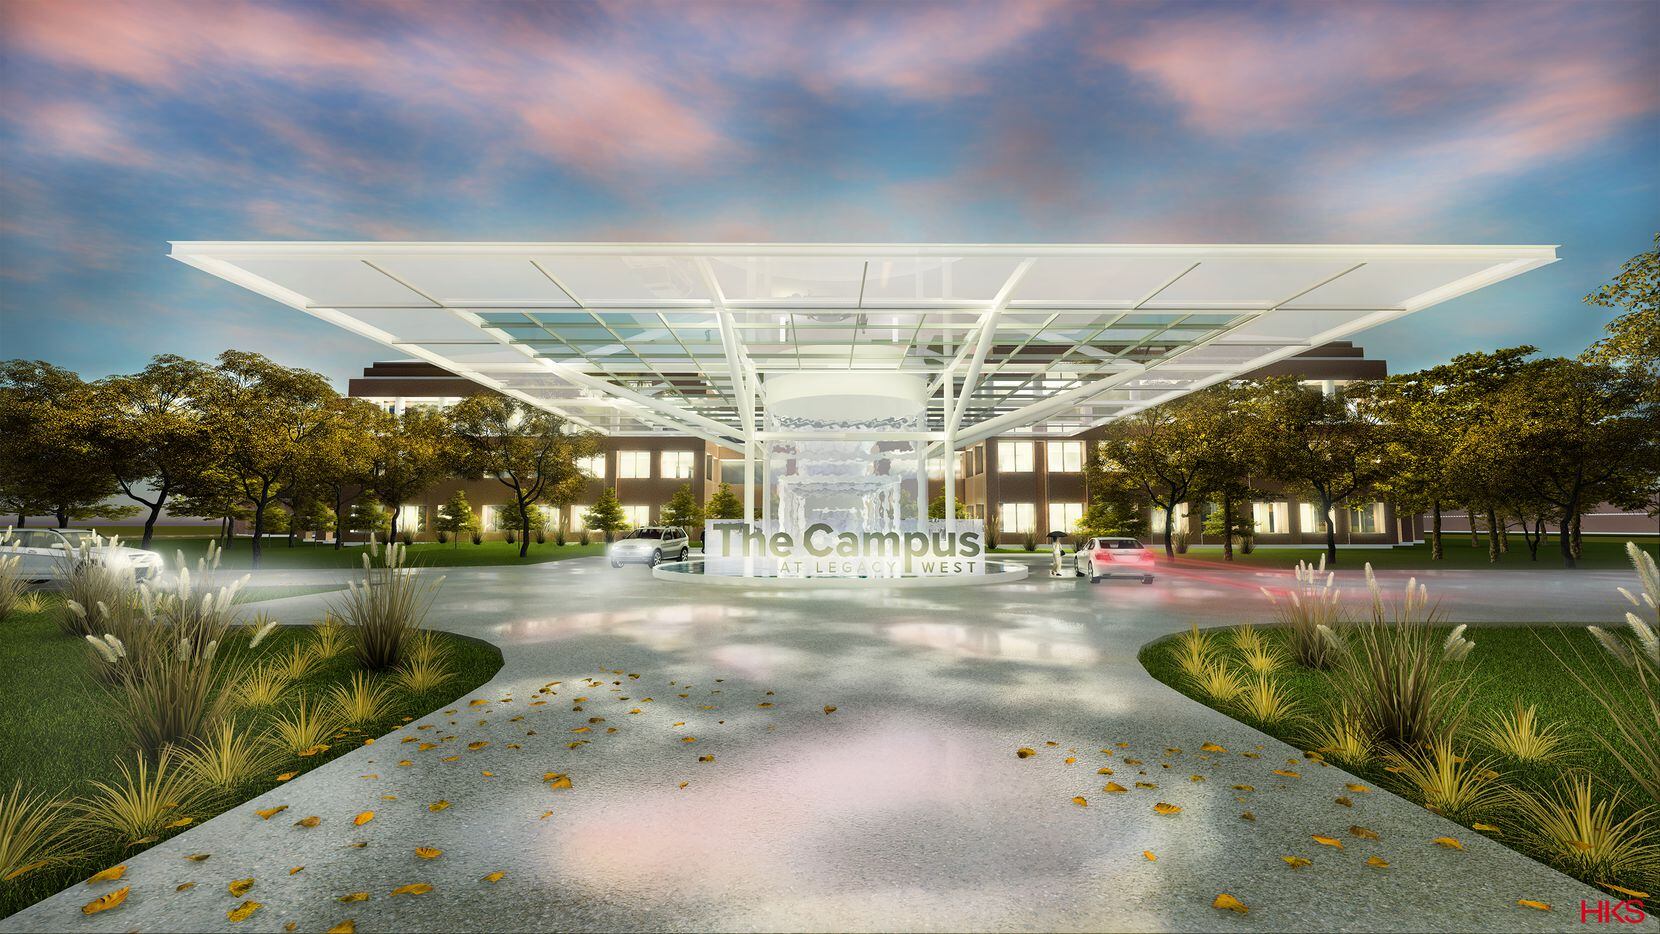 Redevelopment plans for J.C. Penney's corporate office in Plano show a total new look.